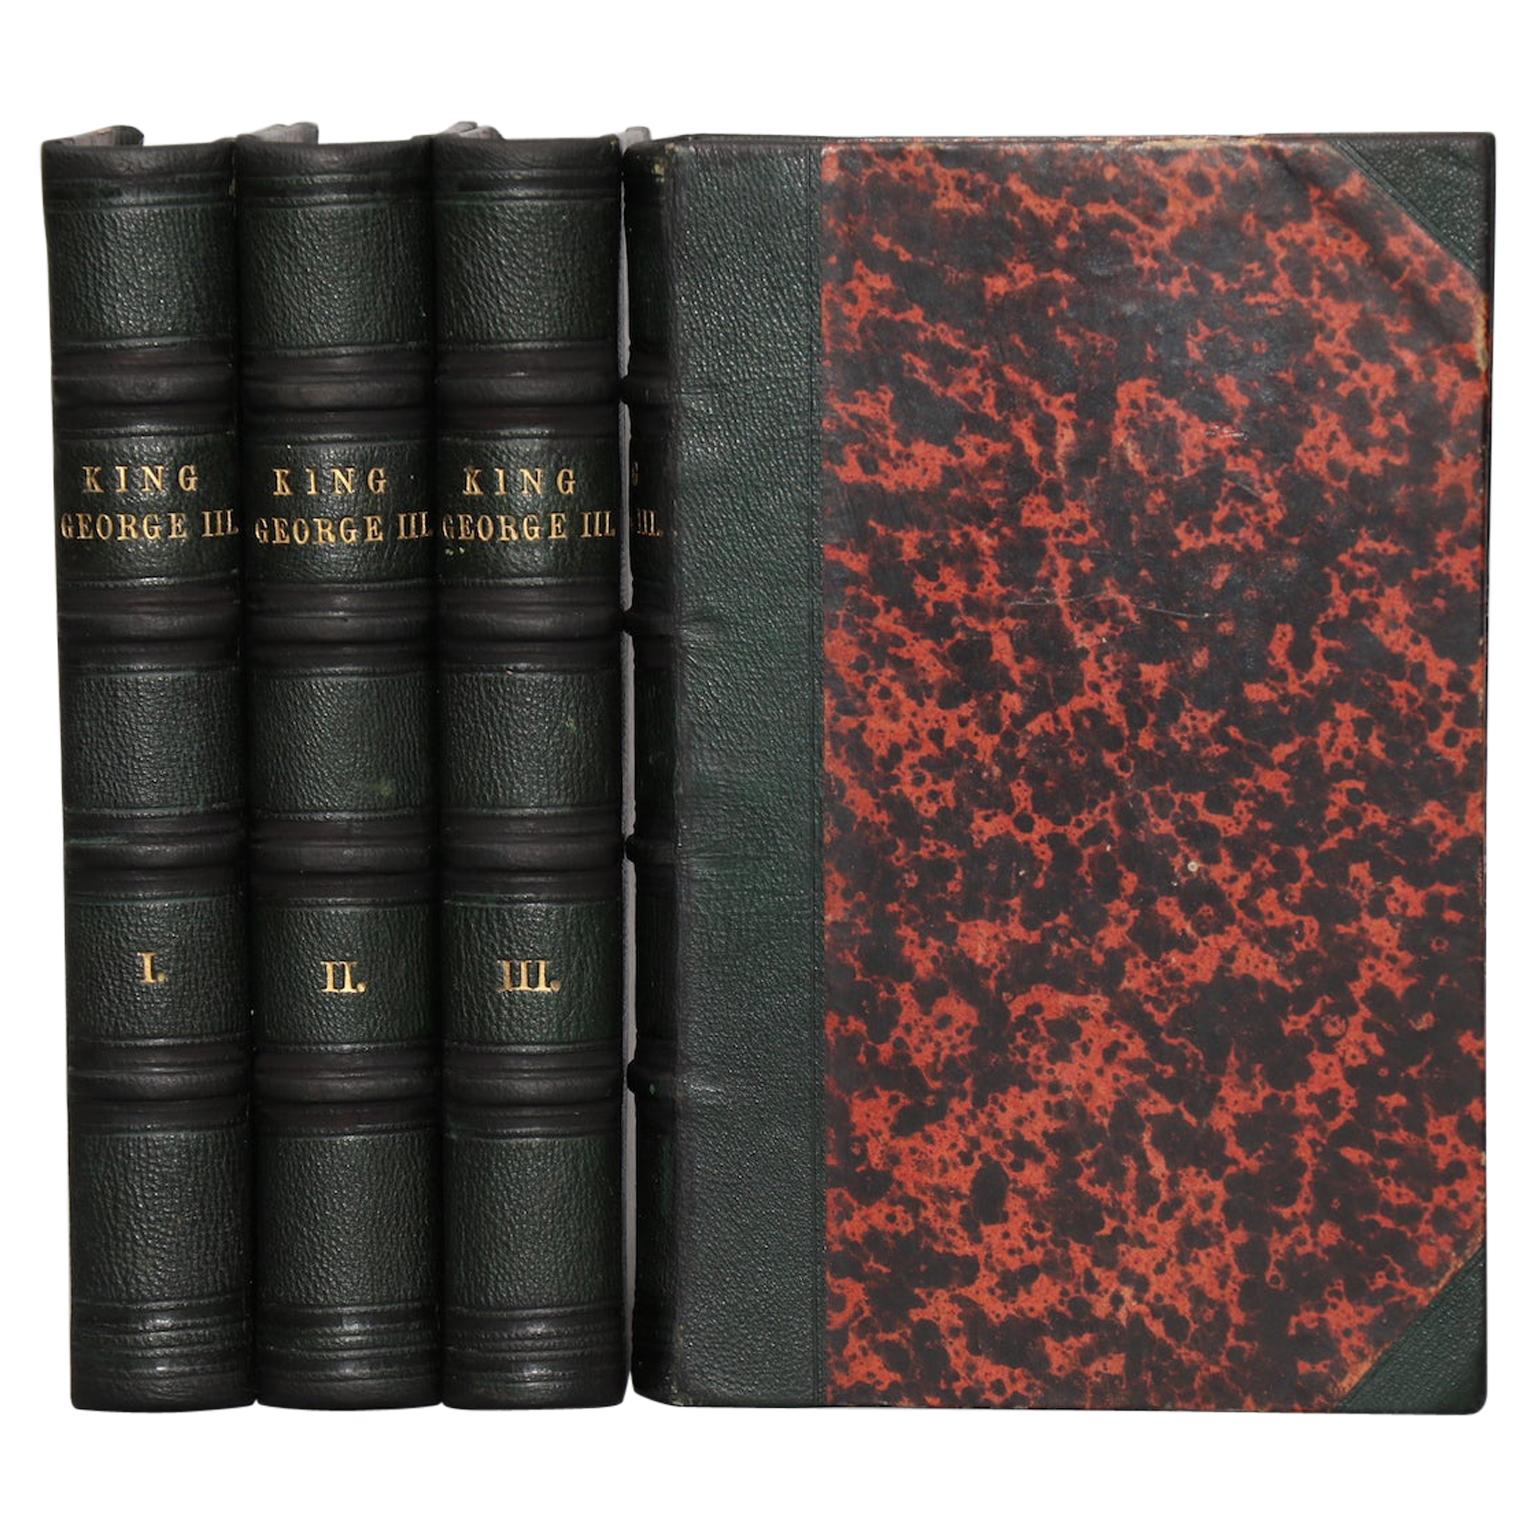 Books, Horace Walpole's "Memoirs of the Reign of King George The Third"